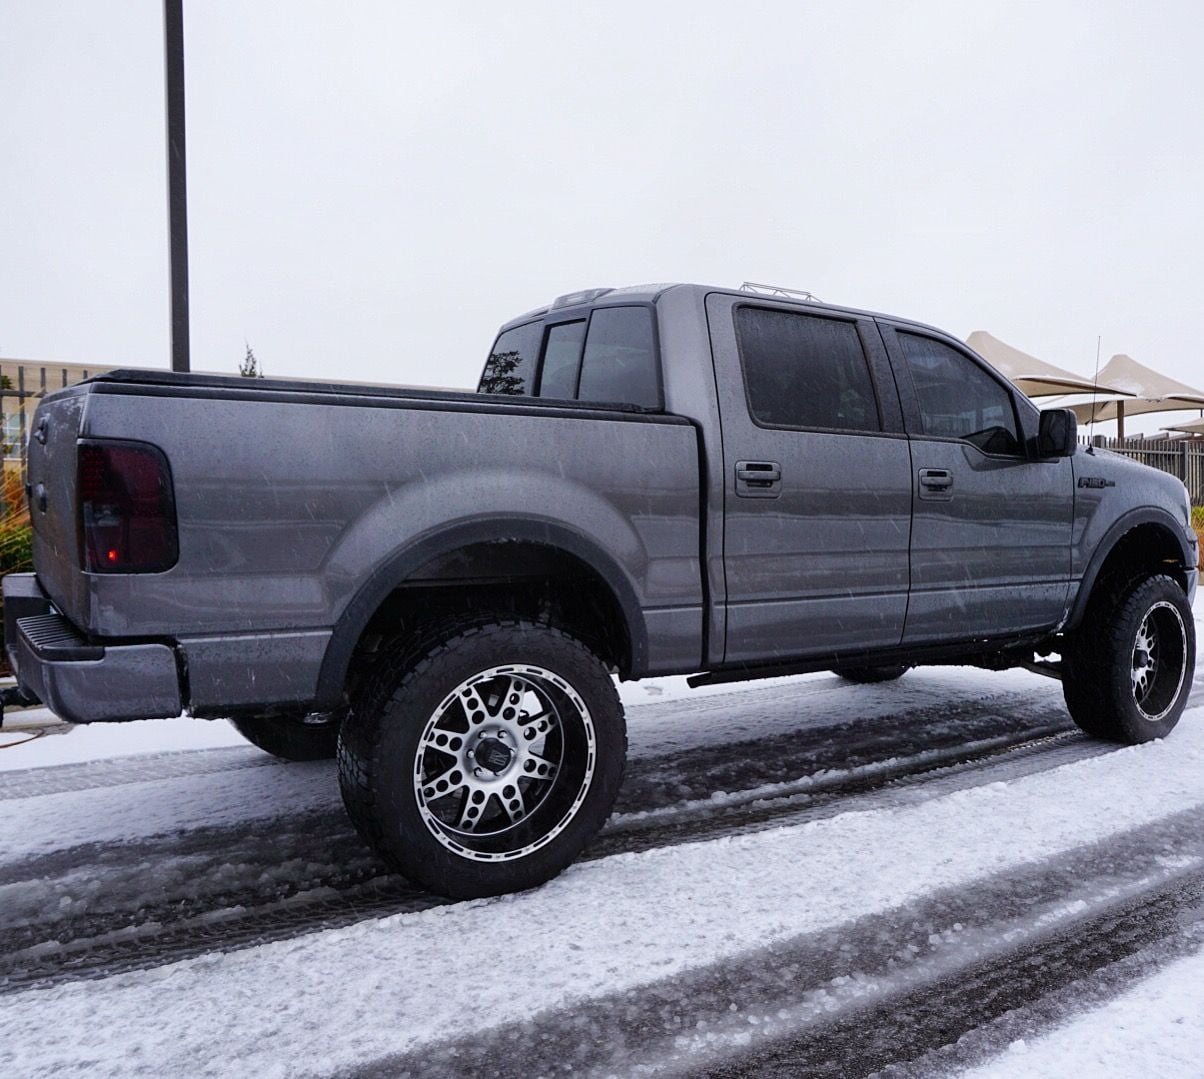 Show off your wheels & tires - Page 99 - Ford F150 Forum - Community of